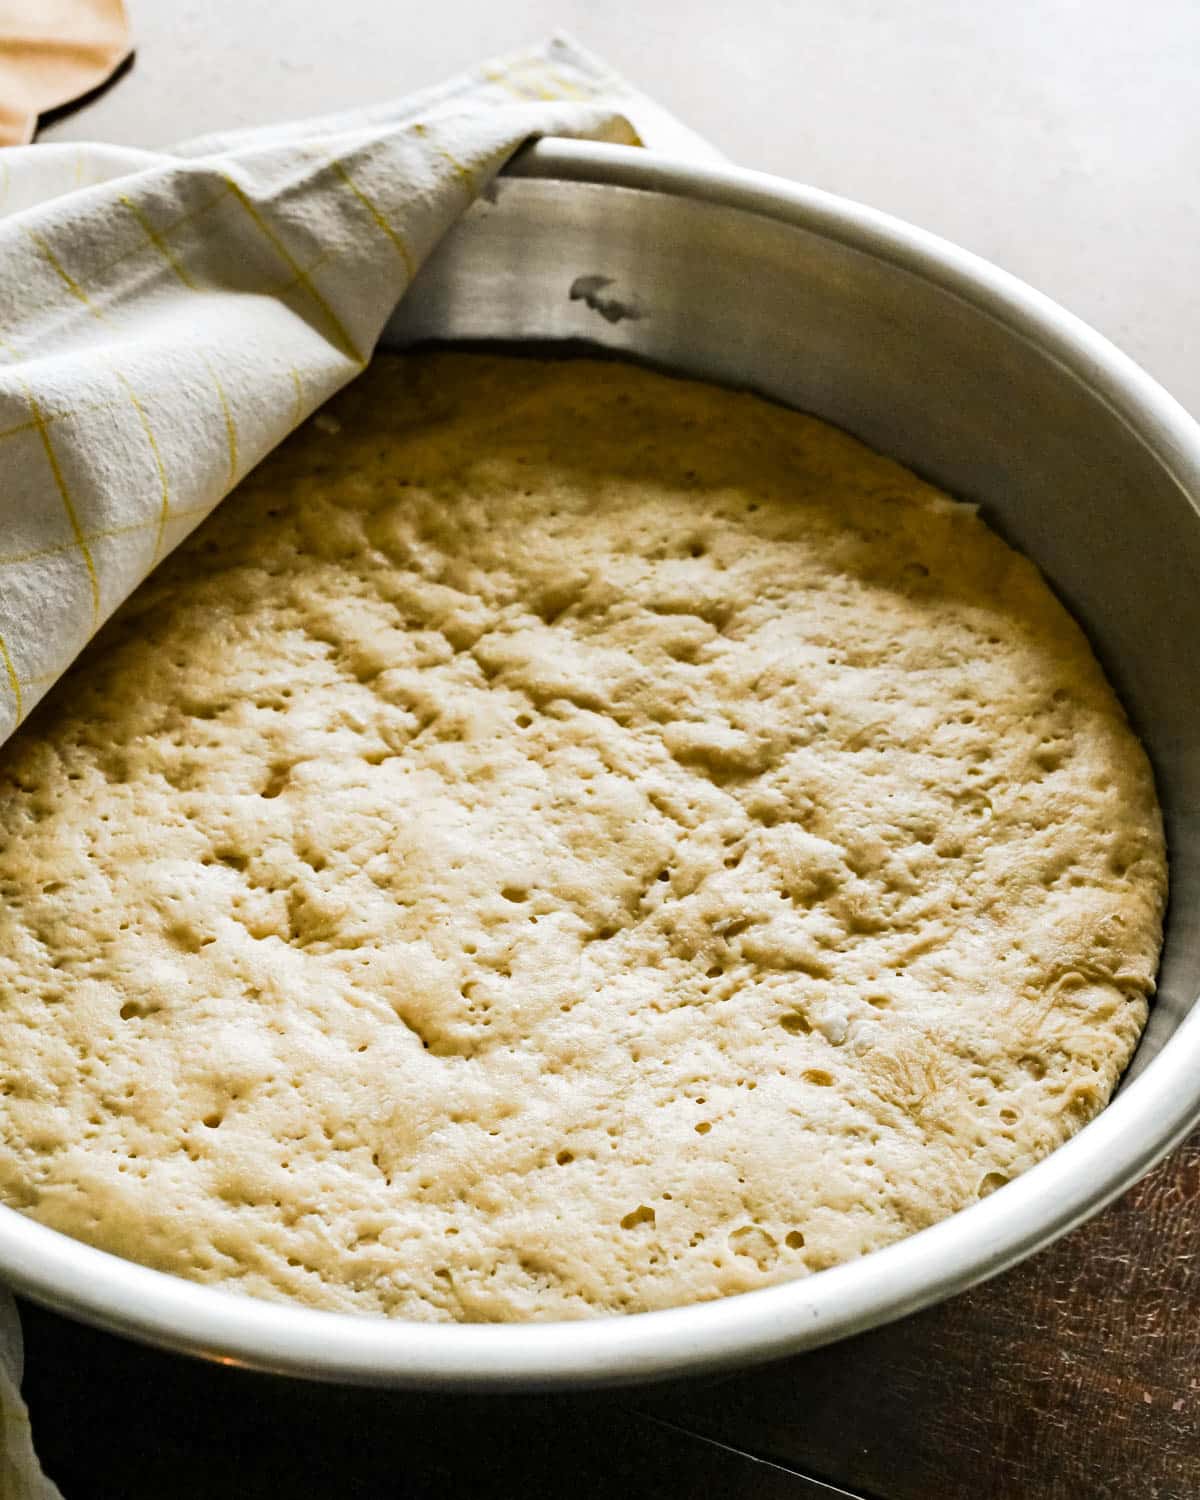 The next day, the dough has spread and risen, filling the bowl with yeast dough.